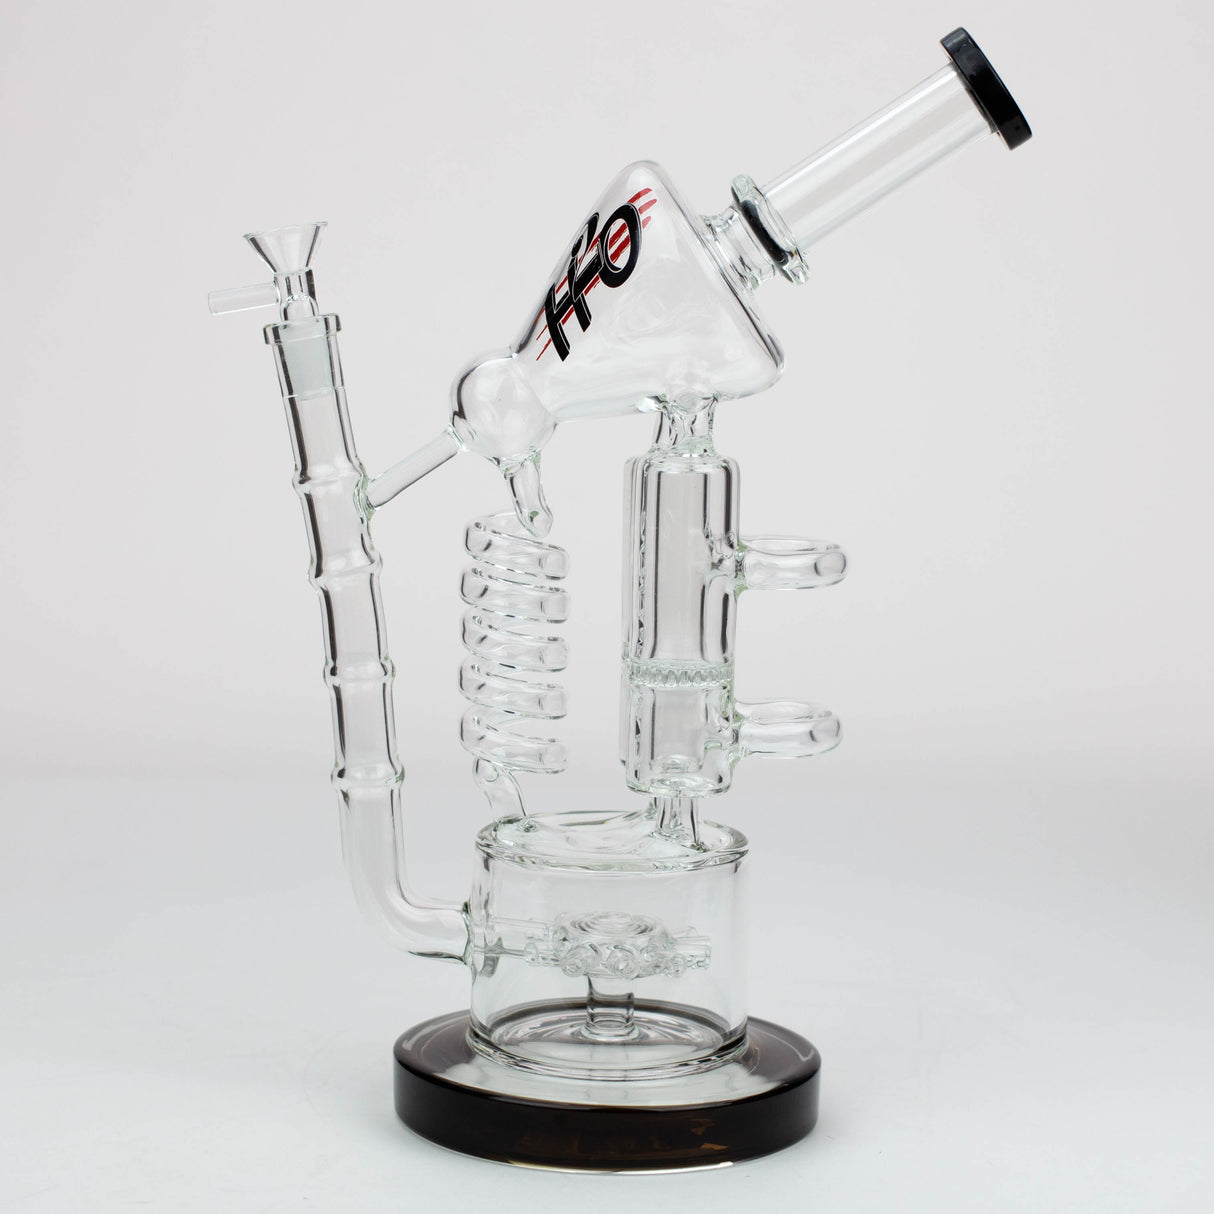 12" H2O Coil Glass water recycle bong [H2O-18]